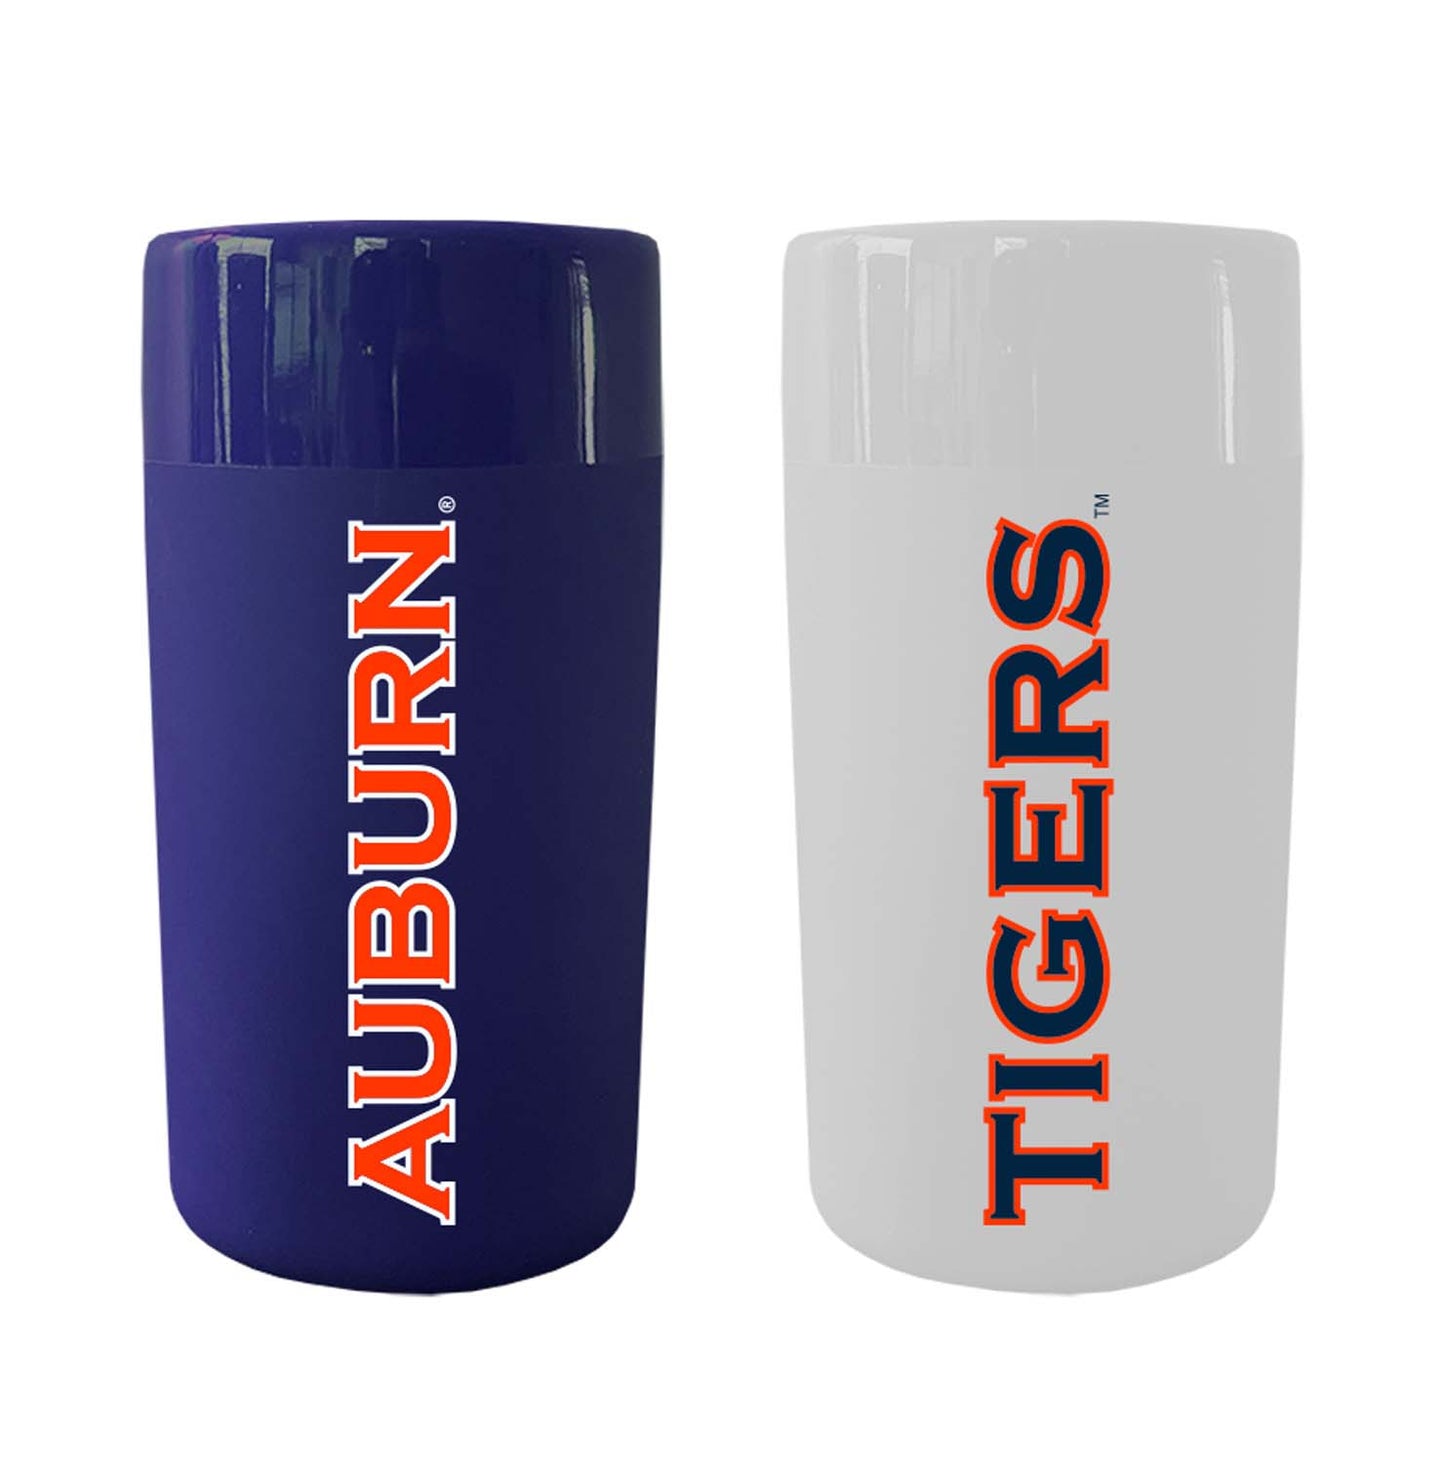 Auburn Tigers College and University 2-Pack Shot Glasses - Team Color